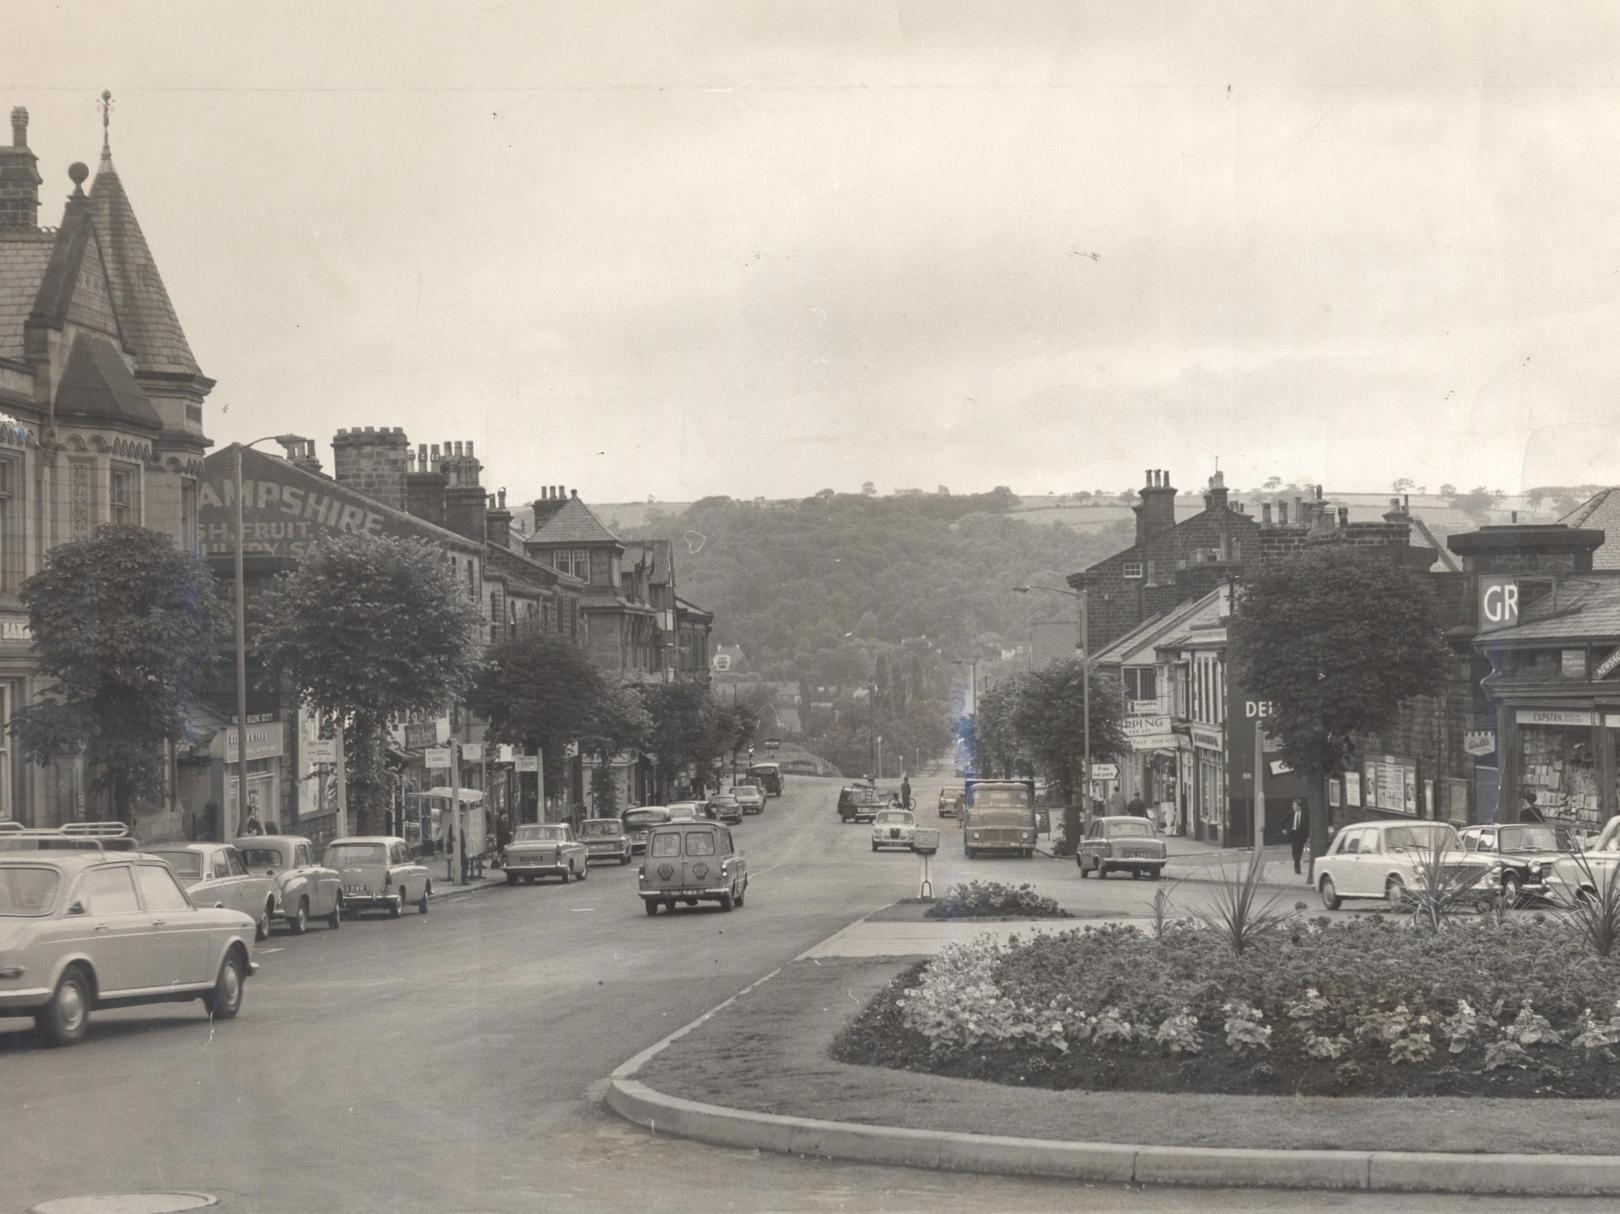 Enjoy this photo gallery of Ilkley down the years.